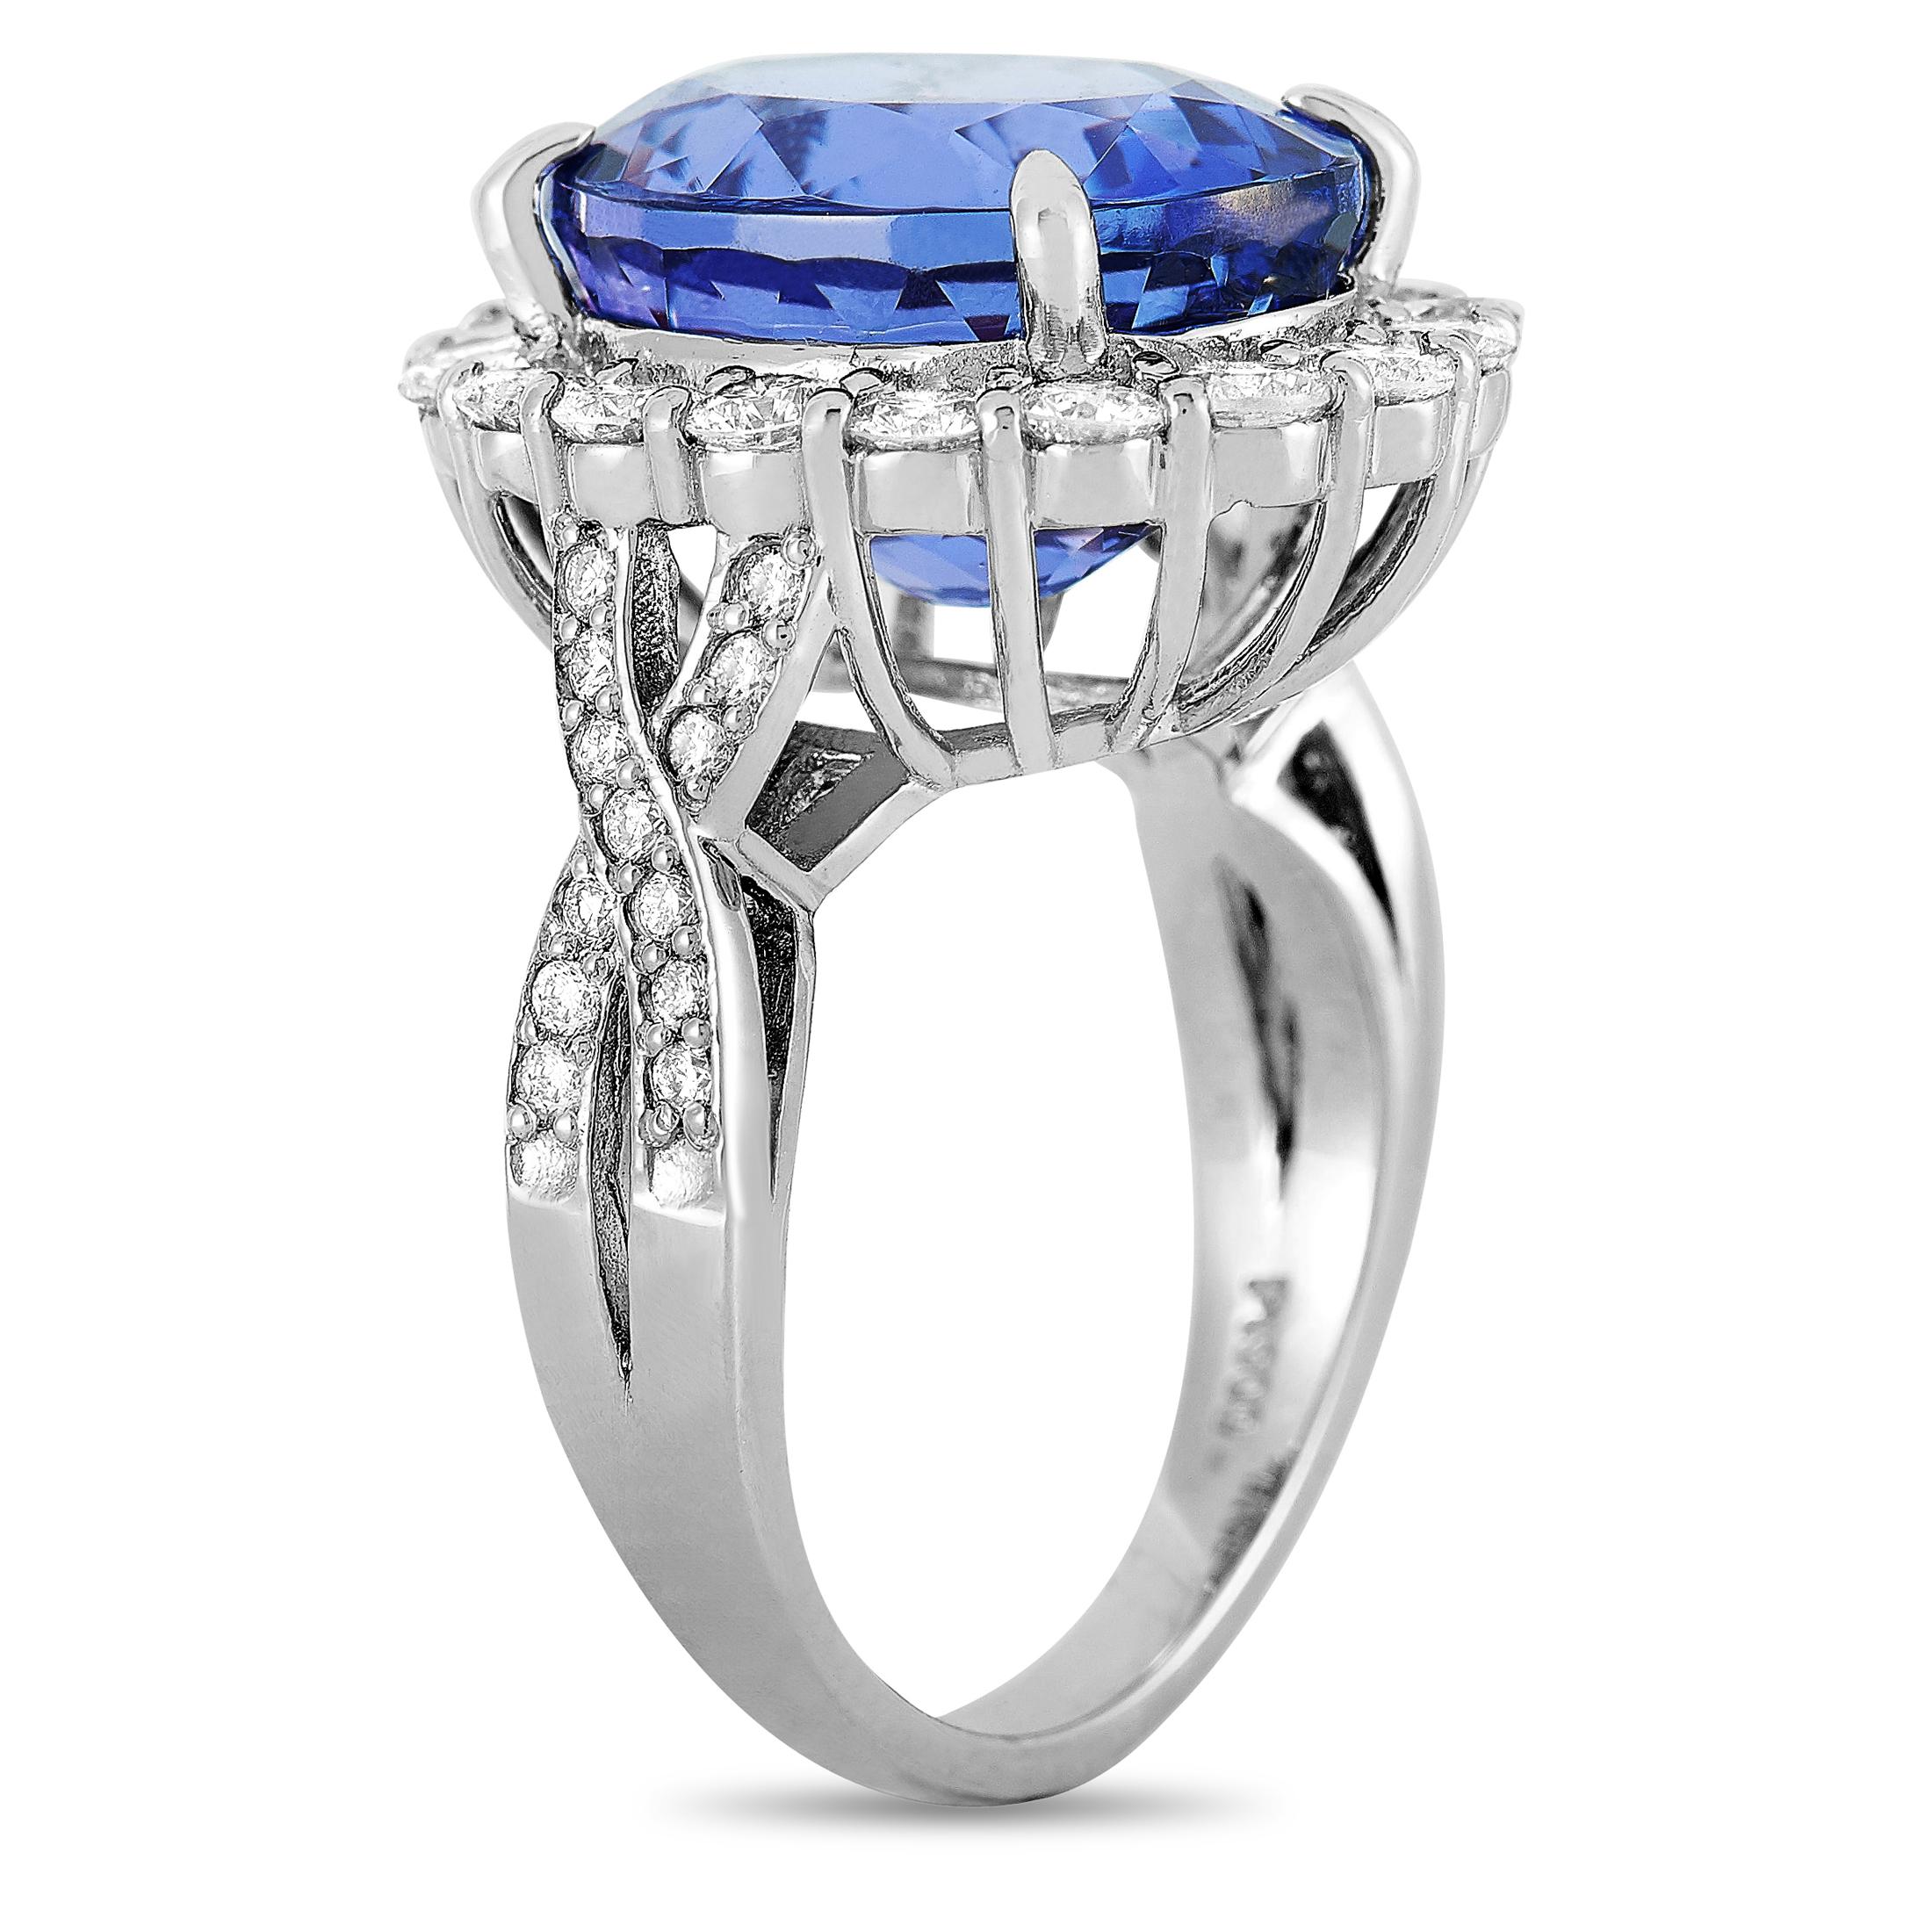 This LB Exclusive ring is made of platinum and embellished with an 11.52 ct tanzanite and a total of 1.60 carats of diamonds. The ring weighs 12.8 grams and boasts band thickness of 3 mm and top height of 10 mm, while top dimensions measure 16 by 20